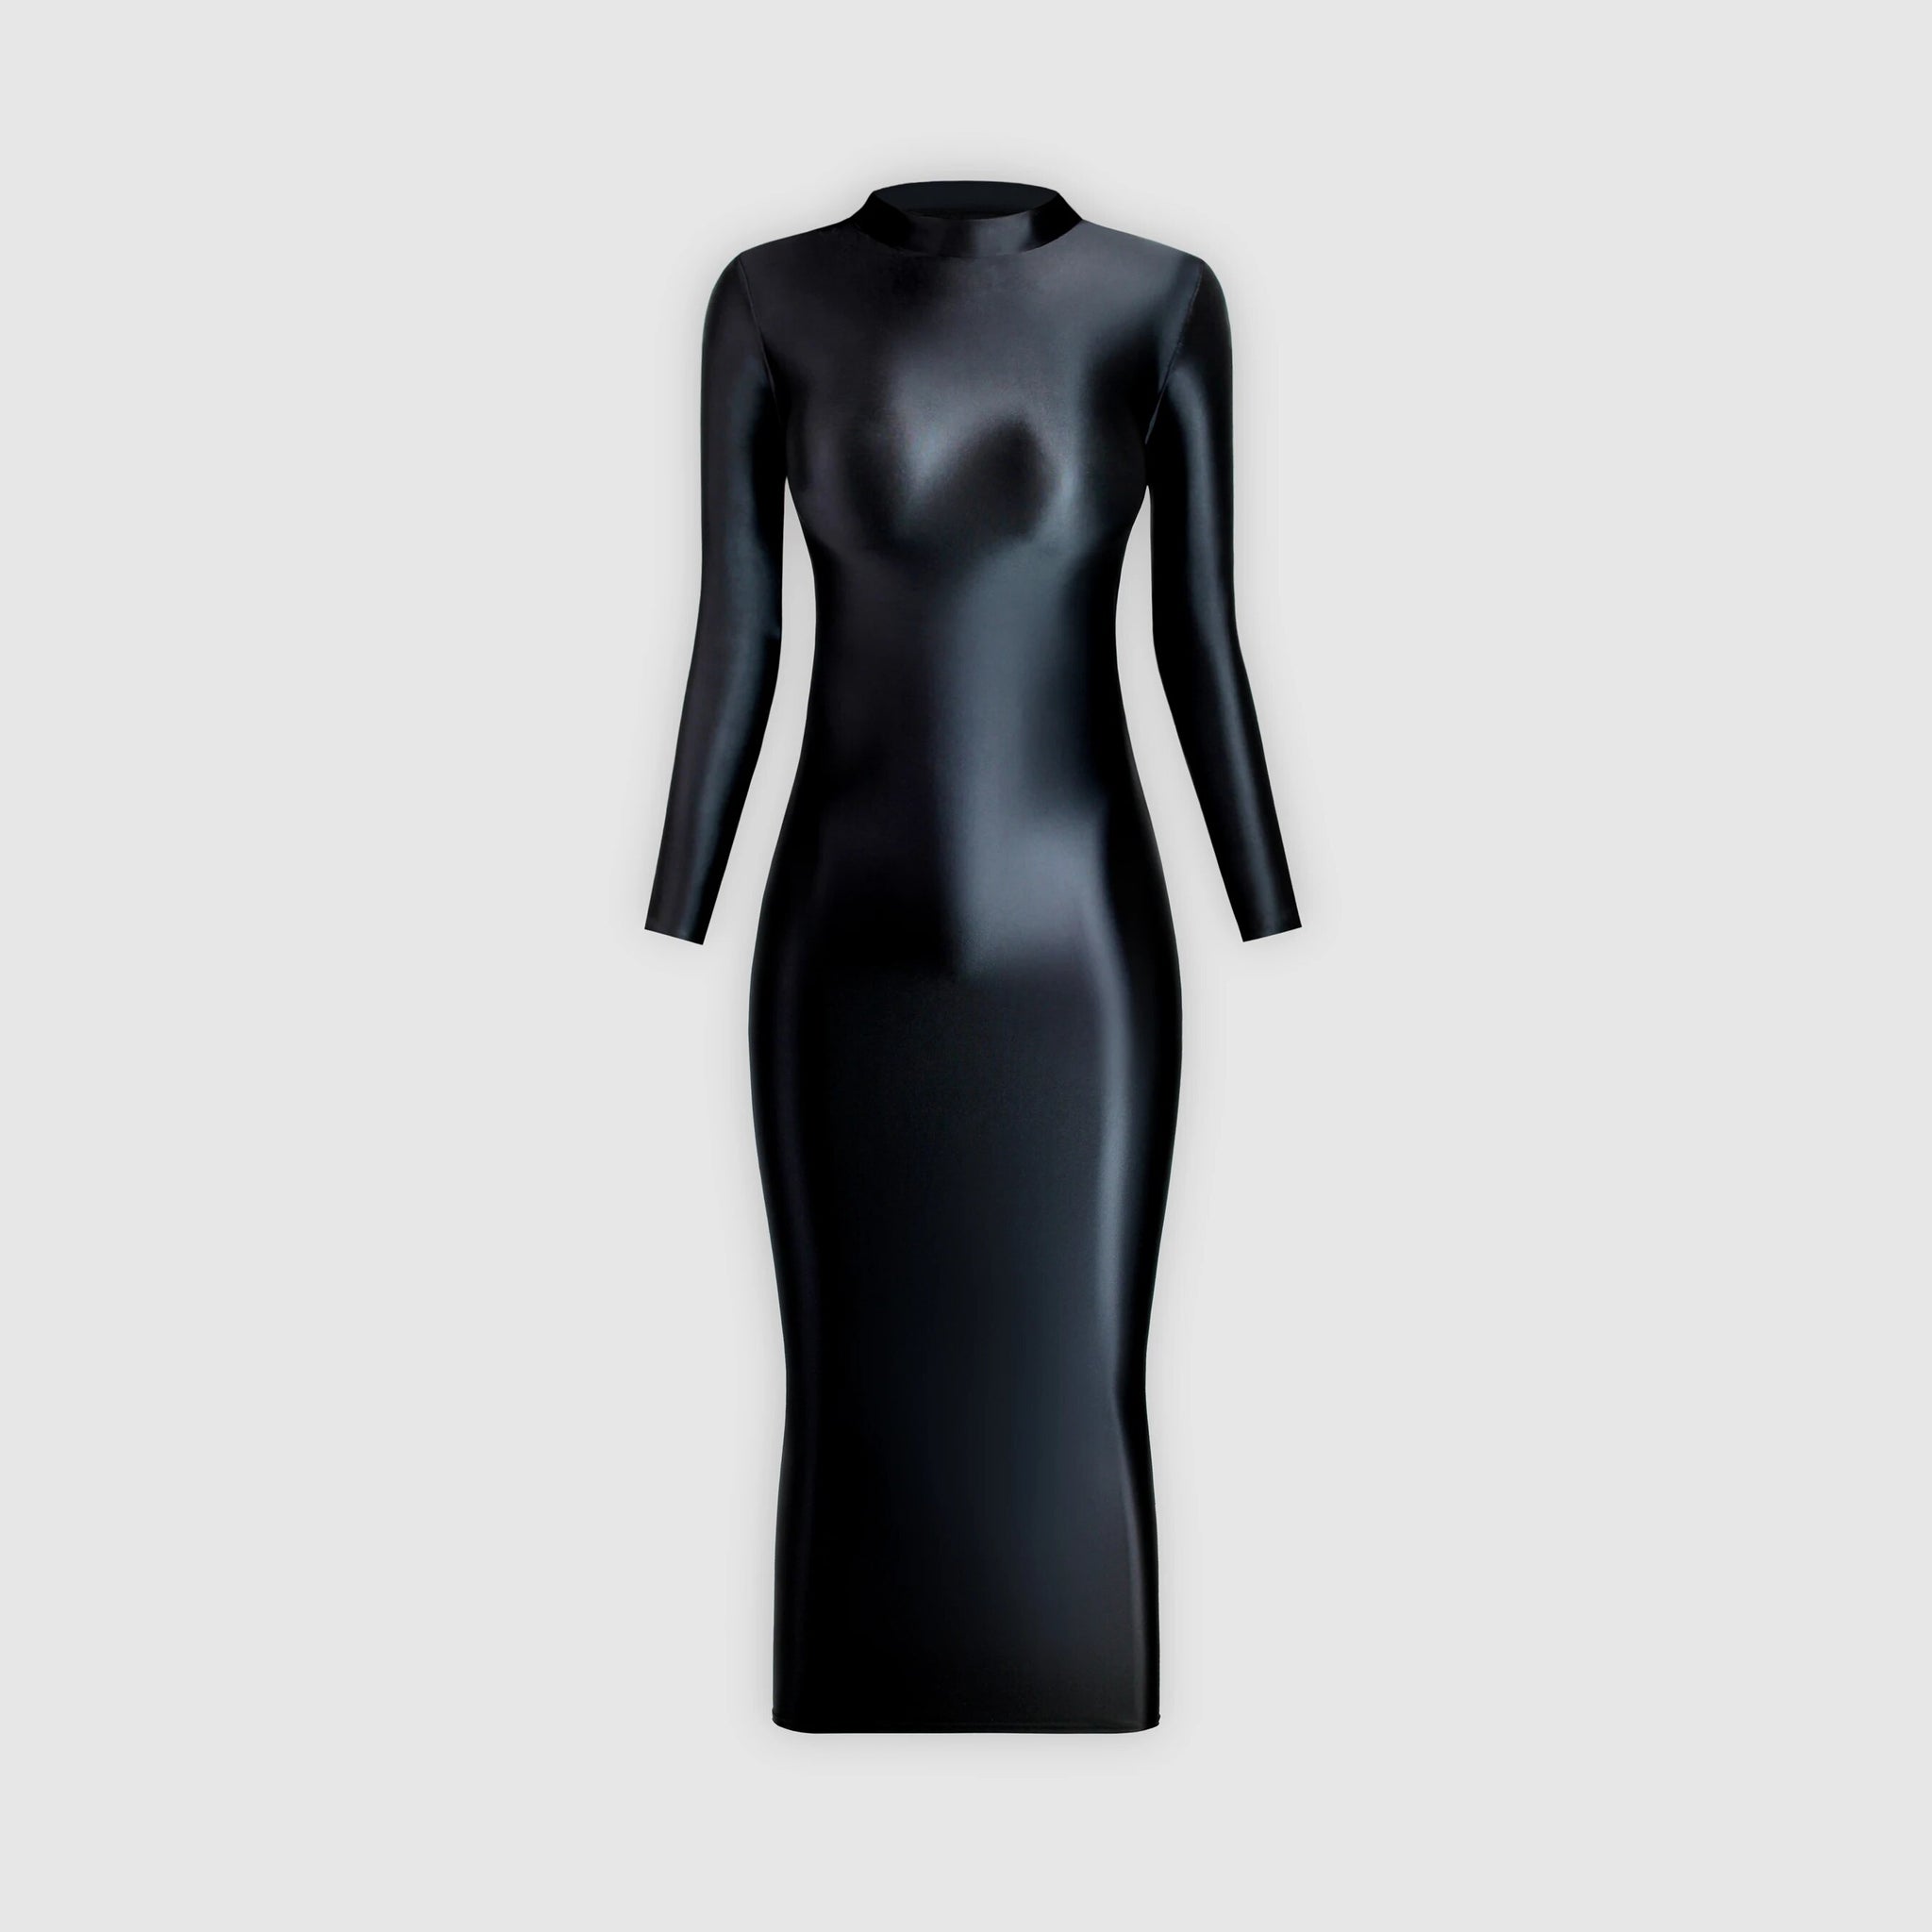 Elegant long-sleeve black glossy dress, ideal for a special occasion.